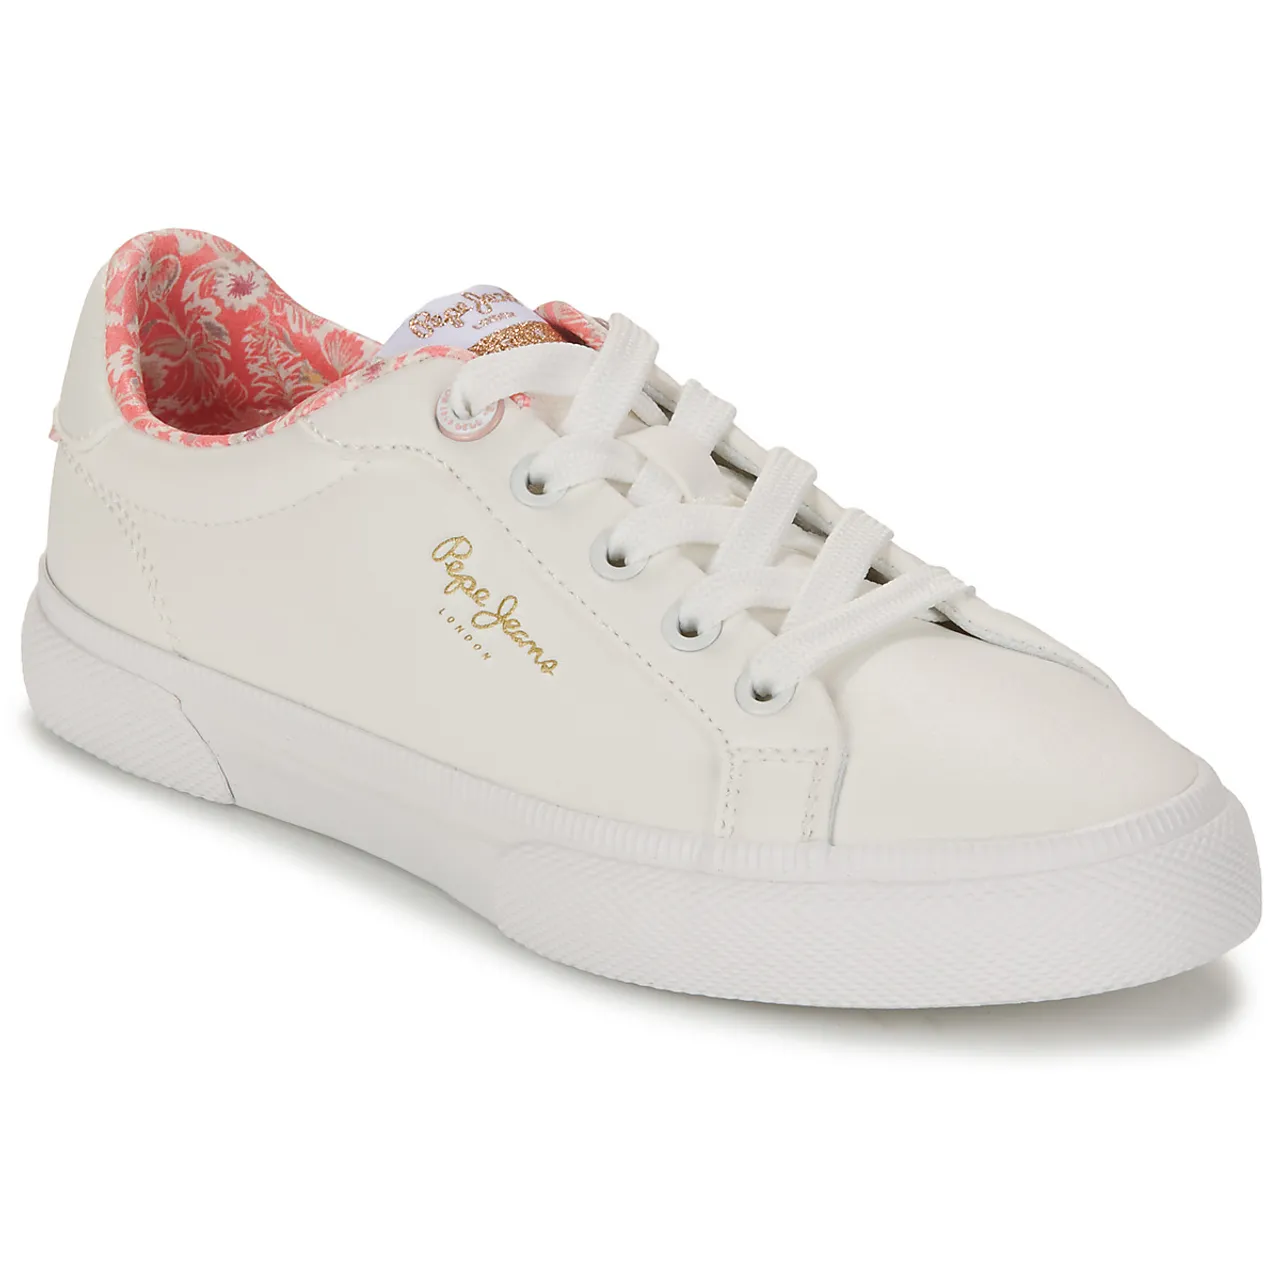 Pepe jeans  KENTON BASS G  girls's Children's Shoes (Trainers) in White